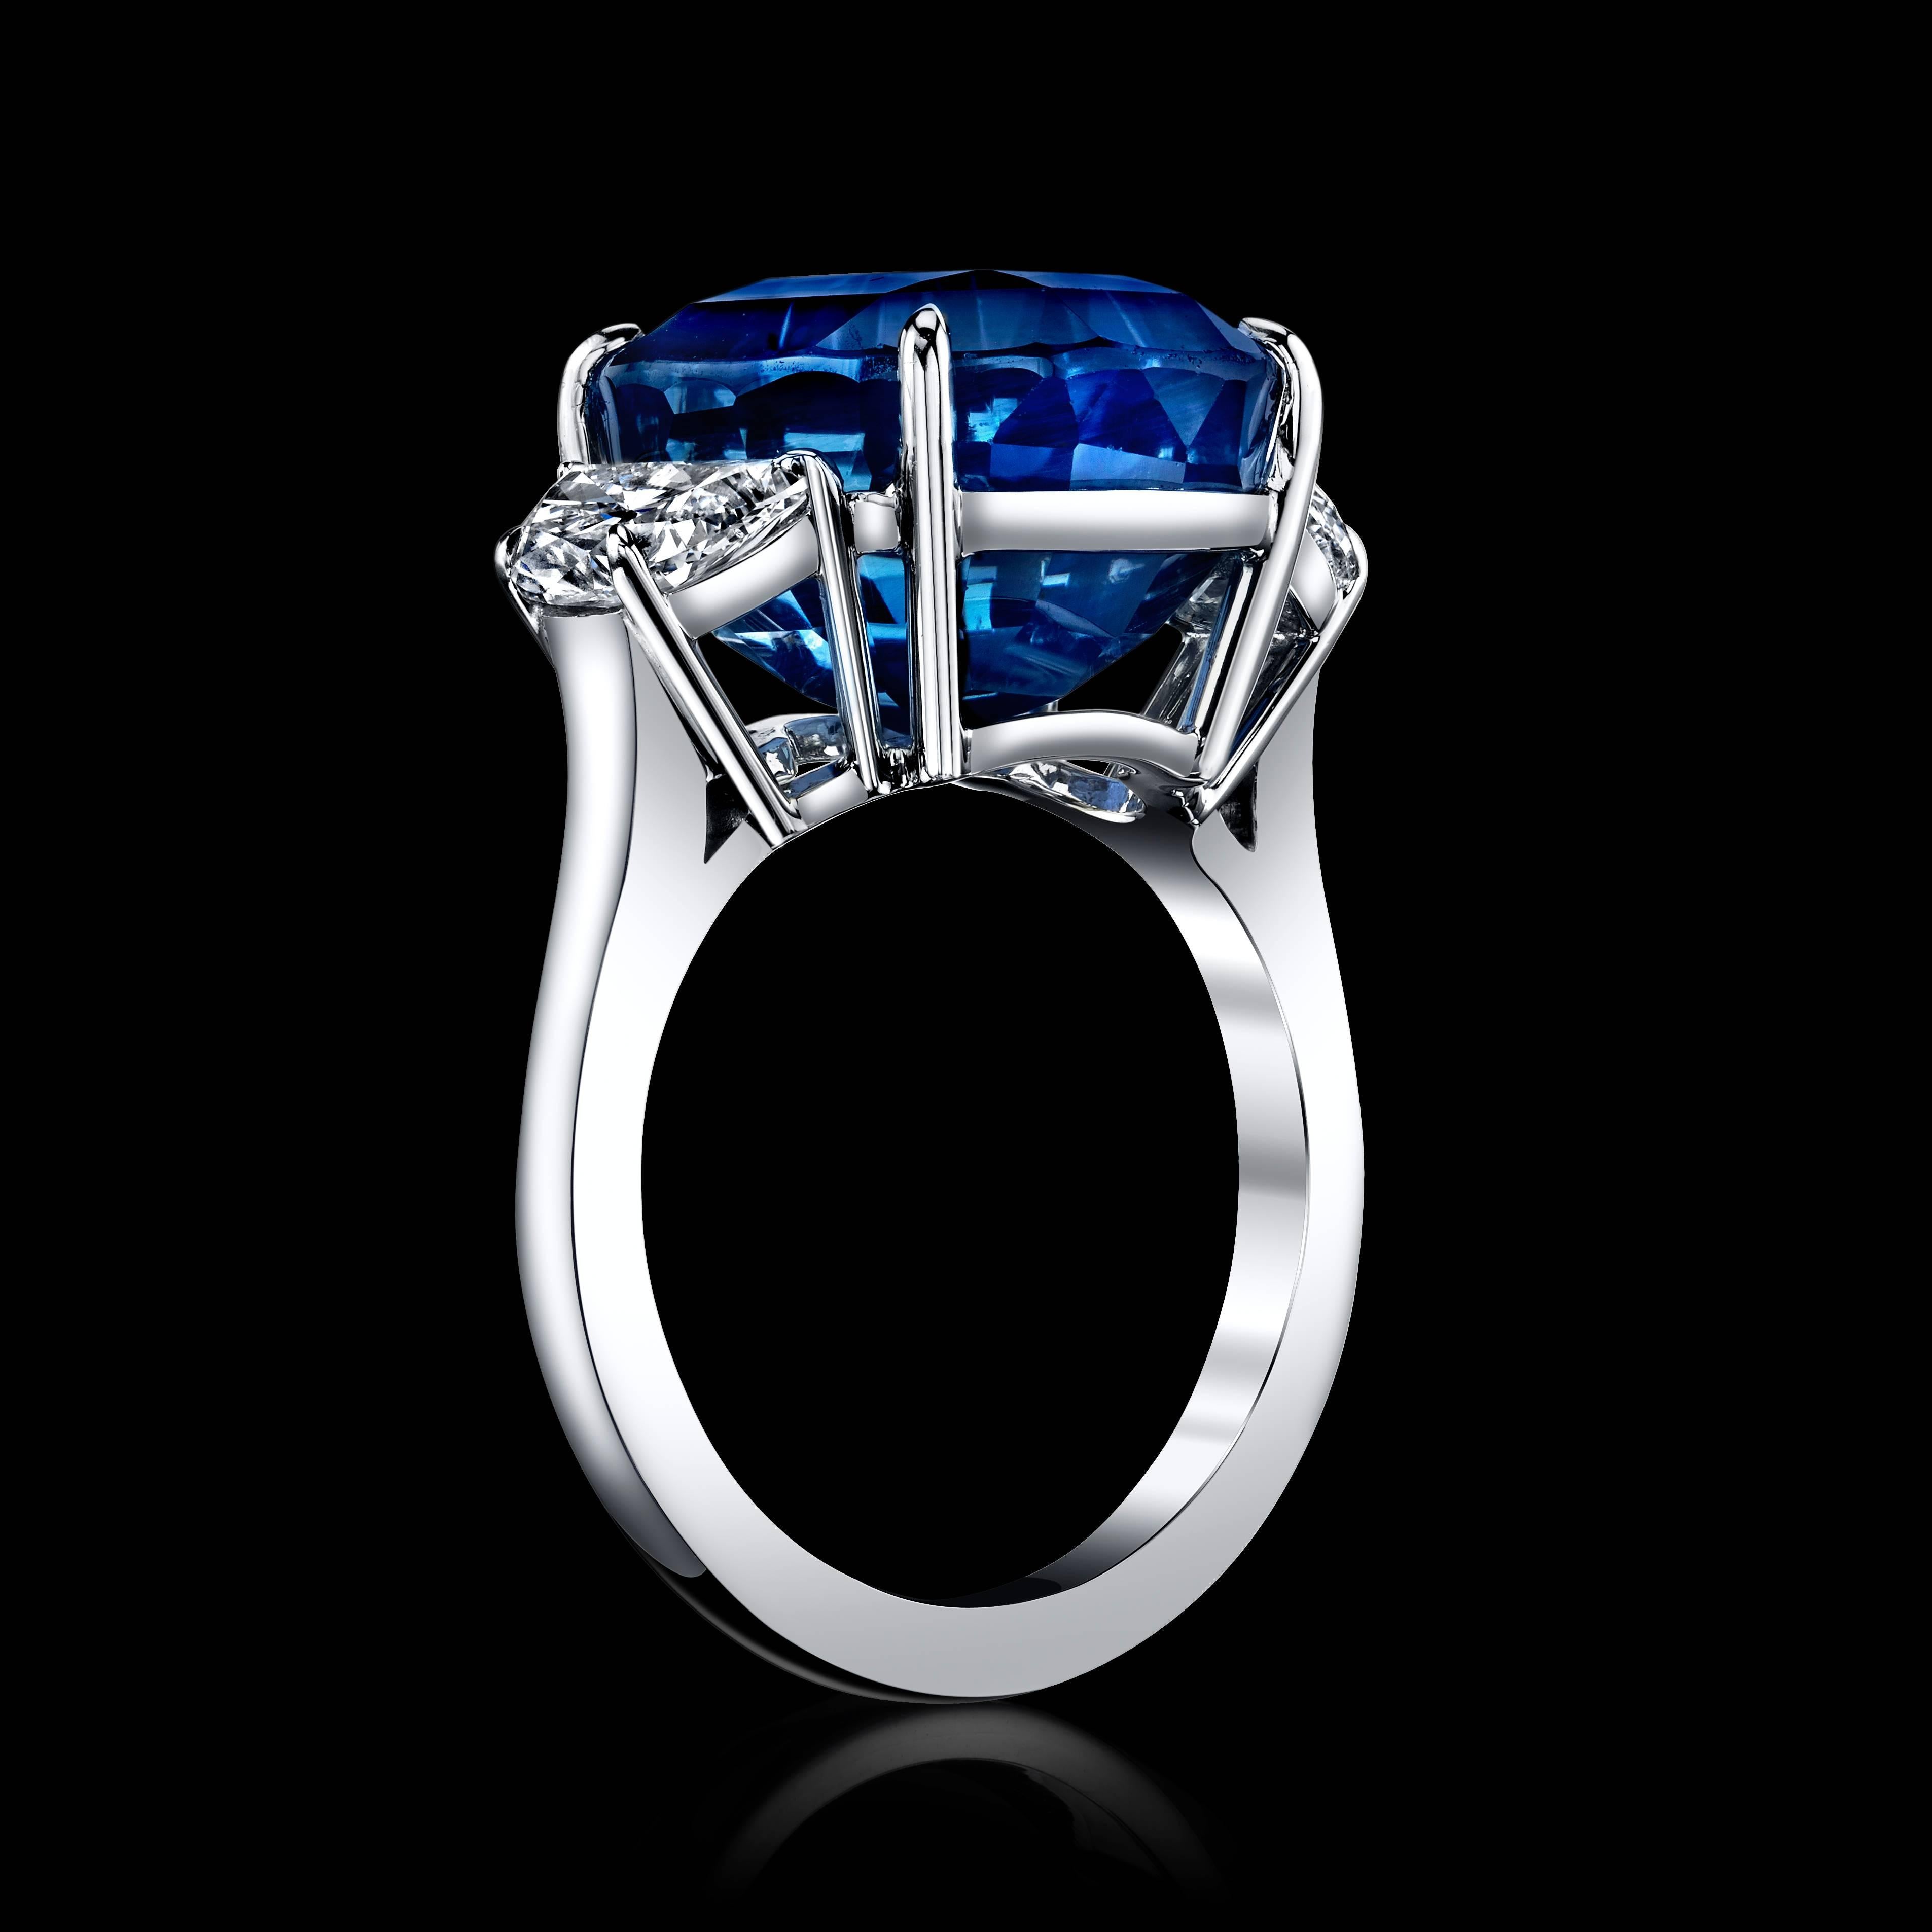 Handmade platinum cushion cut Sapphire and Diamond ring. The blue sapphire is cushion cut, with a weight of 16.33 carats, and is certified as unheated and Sri Lankan origin. 
The center Sapphire is surrounded by two diamond half-moons, weighting a